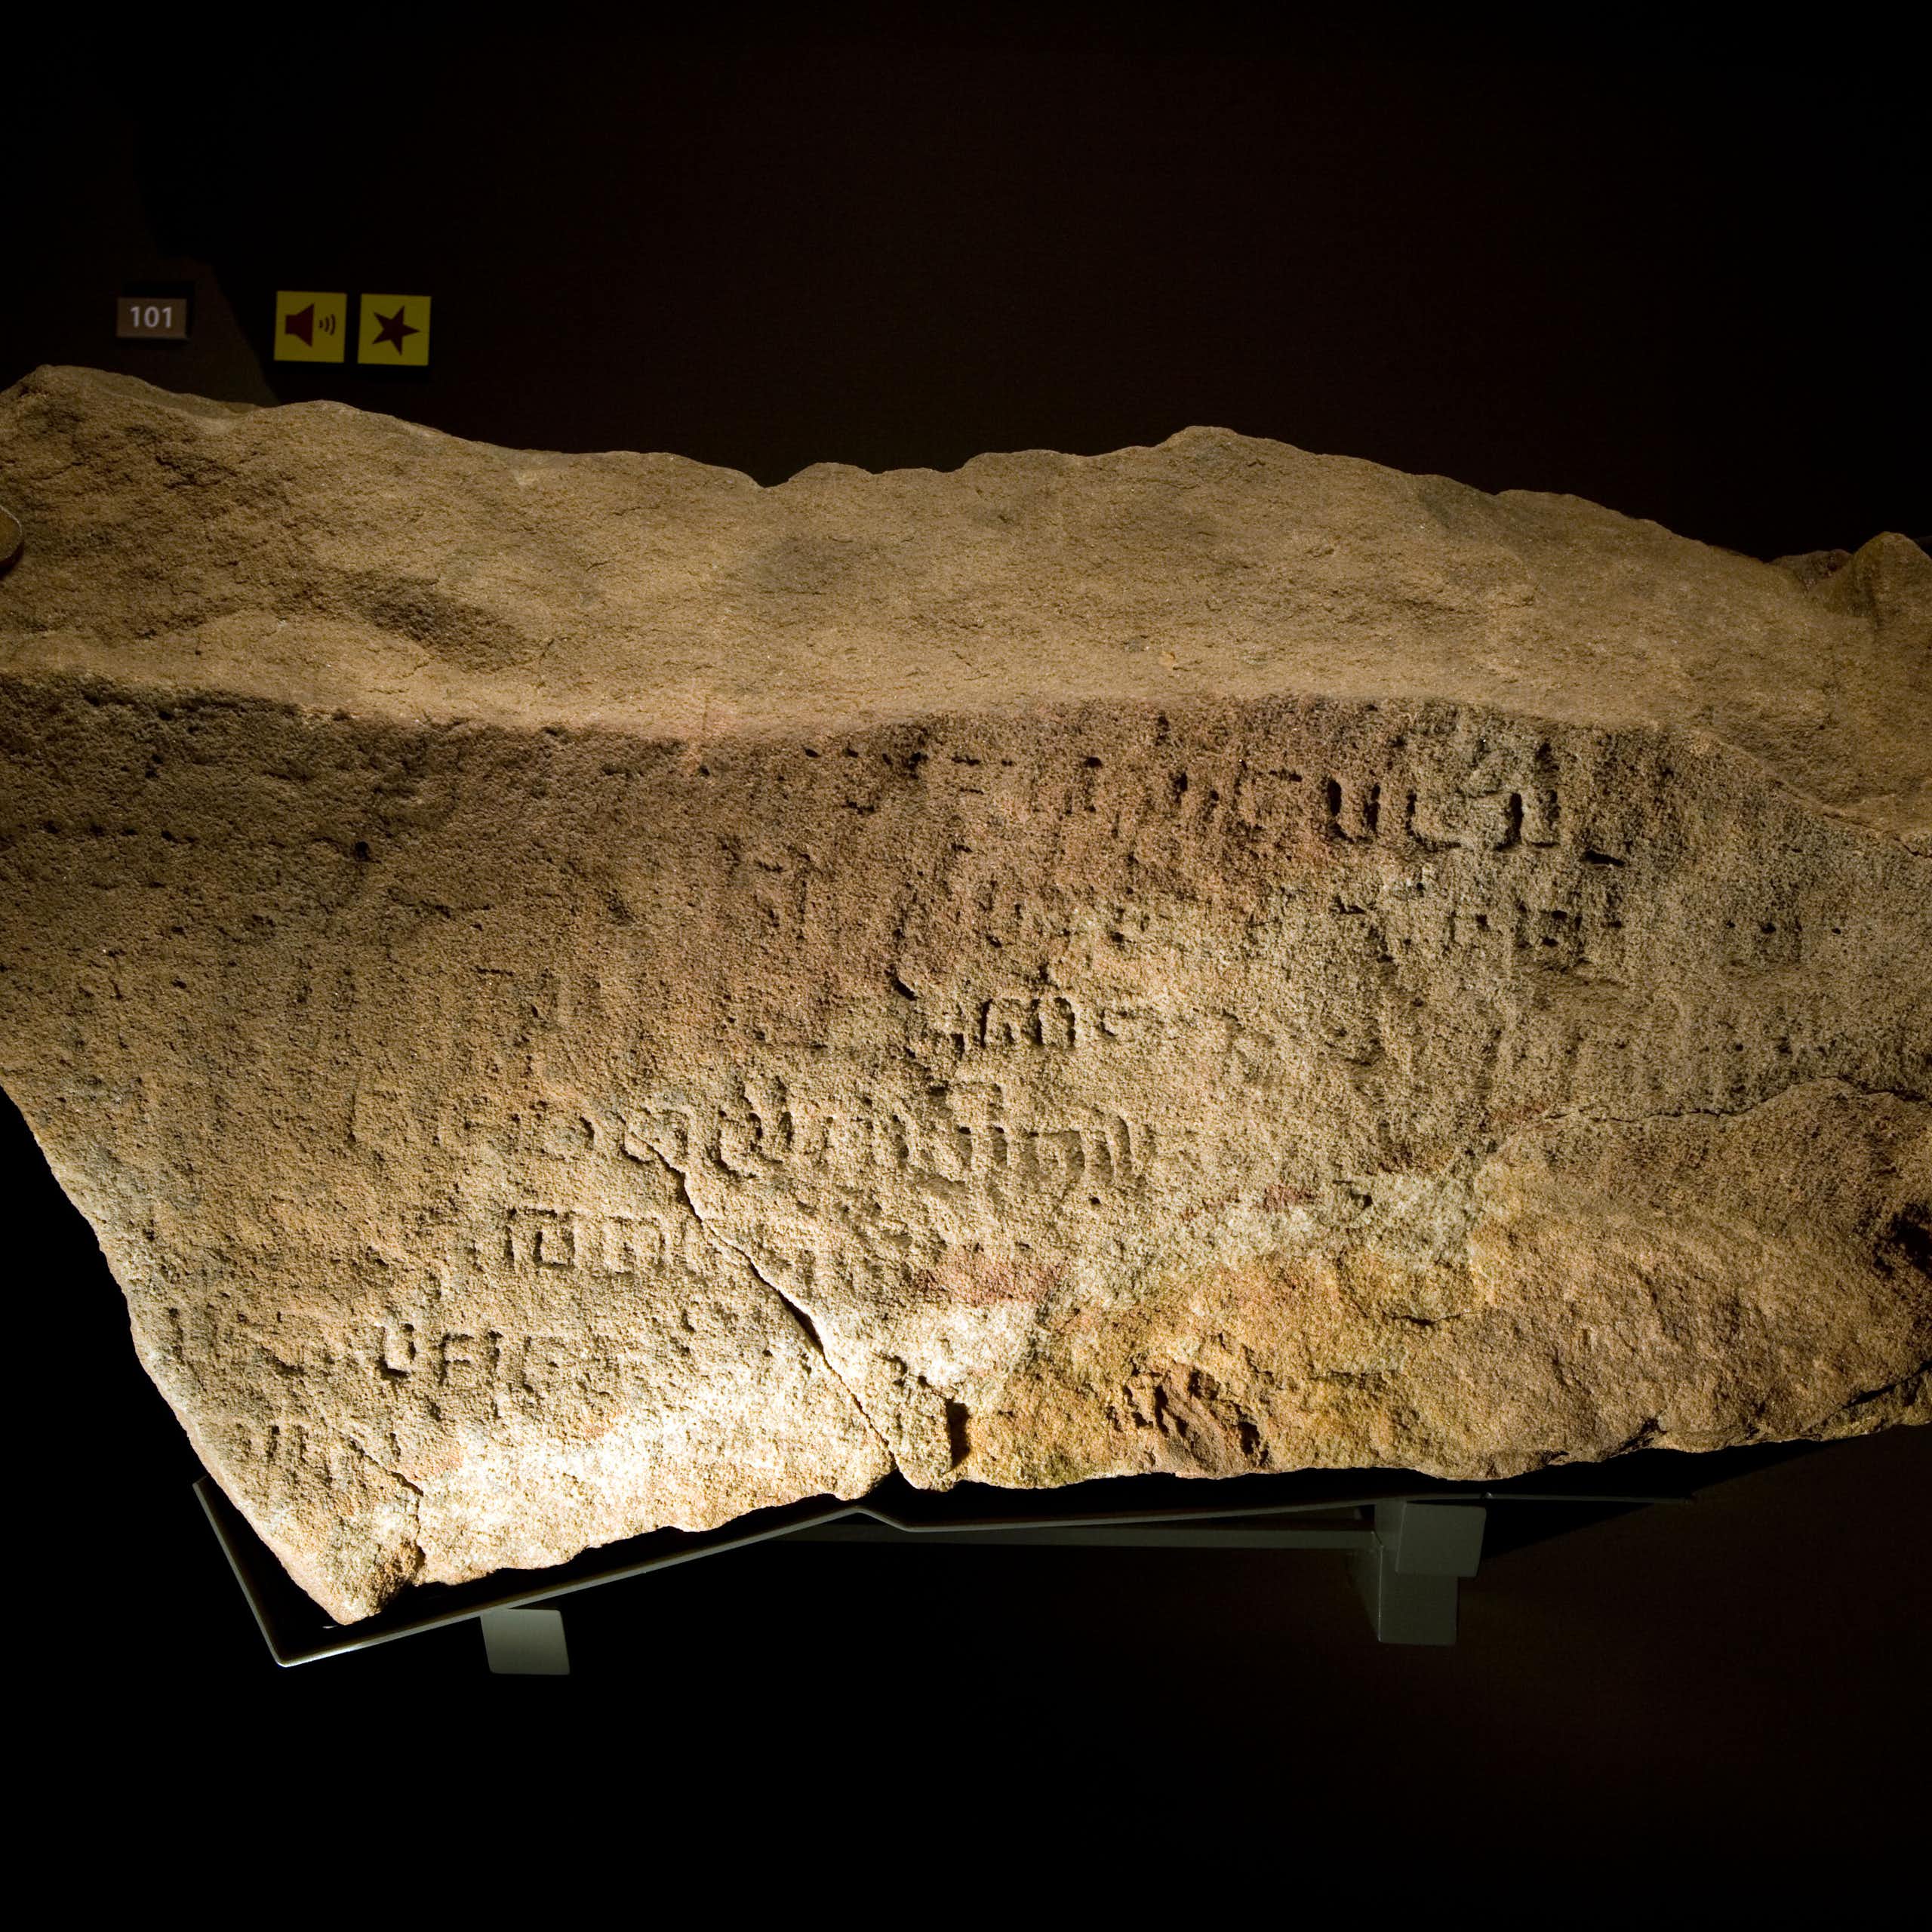 A chunk of stone covered in inscriptions.